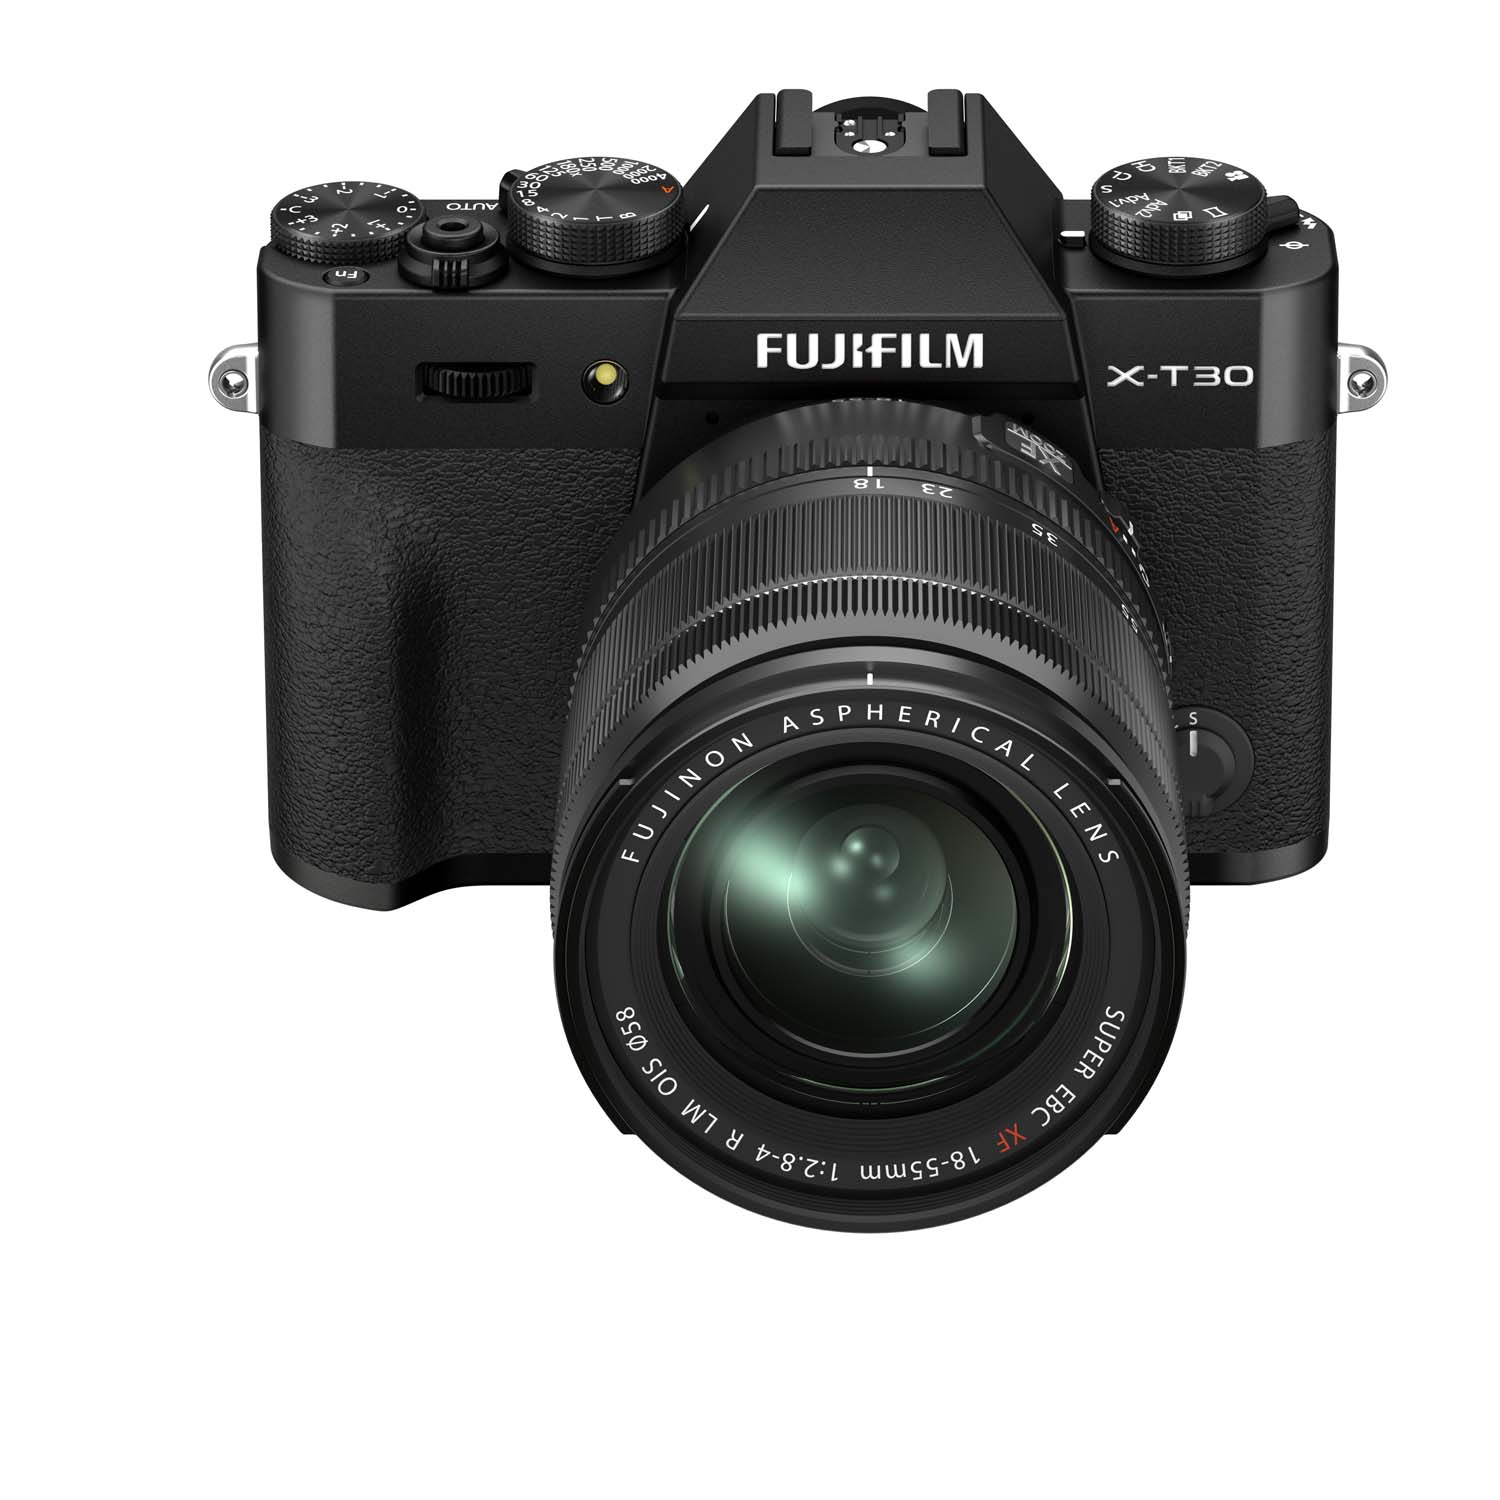 TThumbnail image for Fujifilm X-T30 II with XF18-55mm F2.8-4 R LM OIS